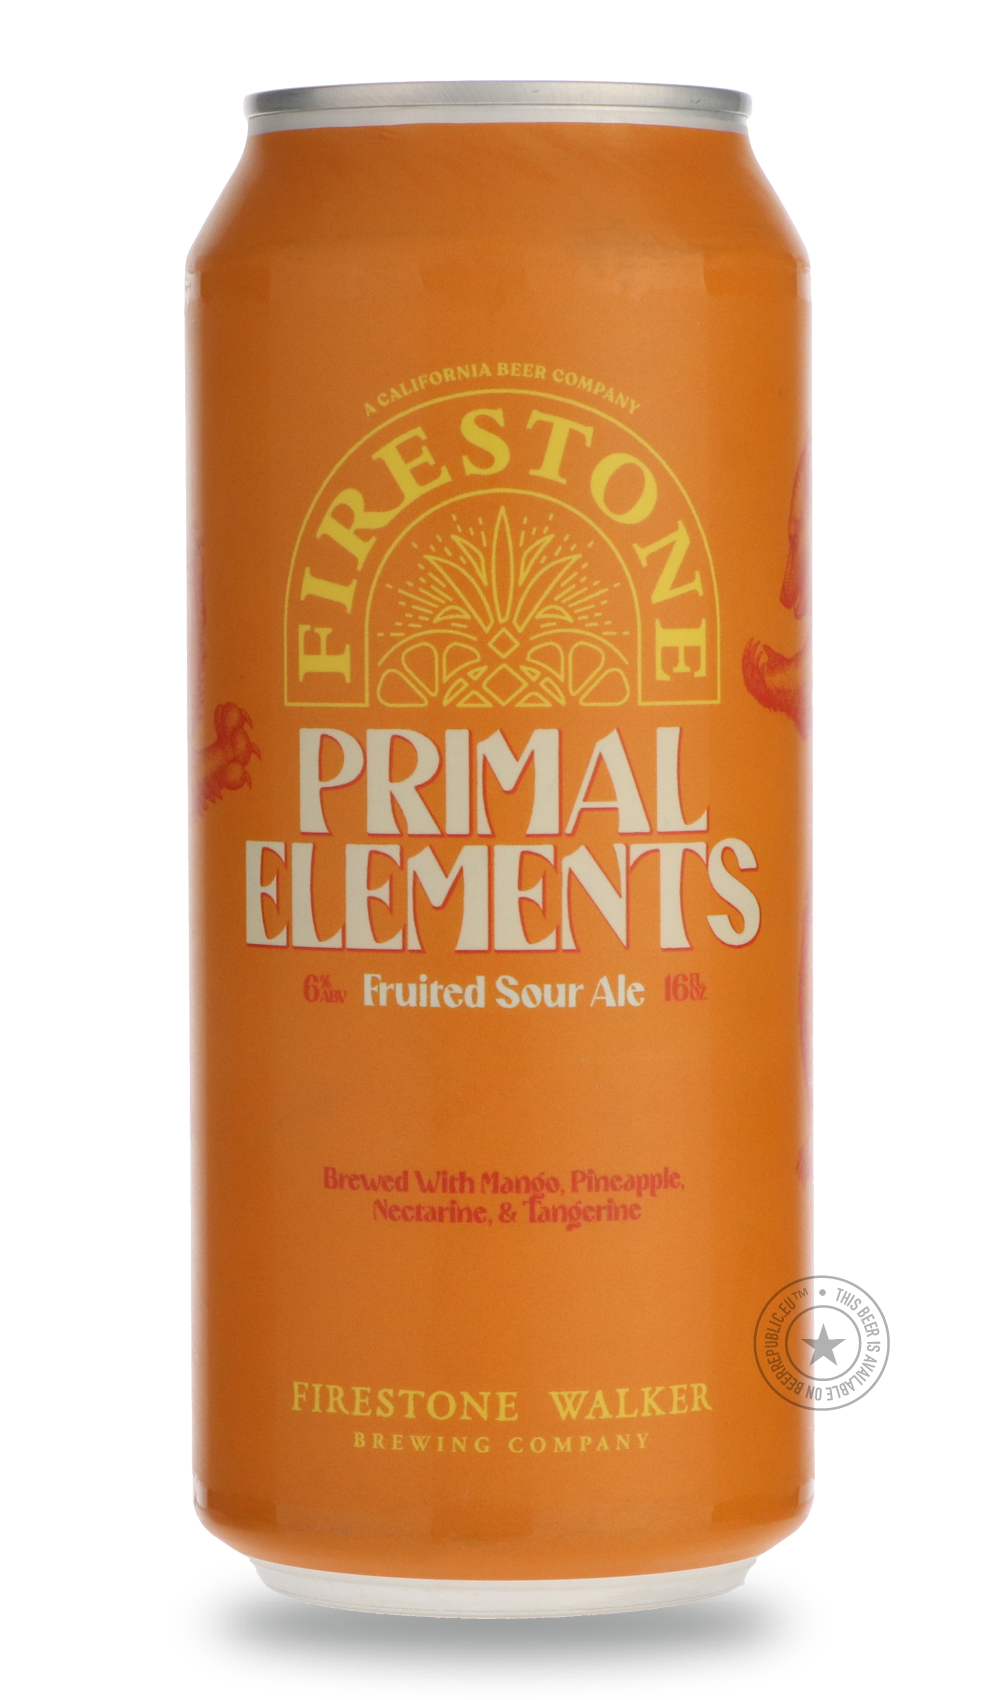 -Firestone Walker- Primal Elements-Sour / Wild & Fruity- Only @ Beer Republic - The best online beer store for American & Canadian craft beer - Buy beer online from the USA and Canada - Bier online kopen - Amerikaans bier kopen - Craft beer store - Craft beer kopen - Amerikanisch bier kaufen - Bier online kaufen - Acheter biere online - IPA - Stout - Porter - New England IPA - Hazy IPA - Imperial Stout - Barrel Aged - Barrel Aged Imperial Stout - Brown - Dark beer - Blond - Blonde - Pilsner - Lager - Wheat 